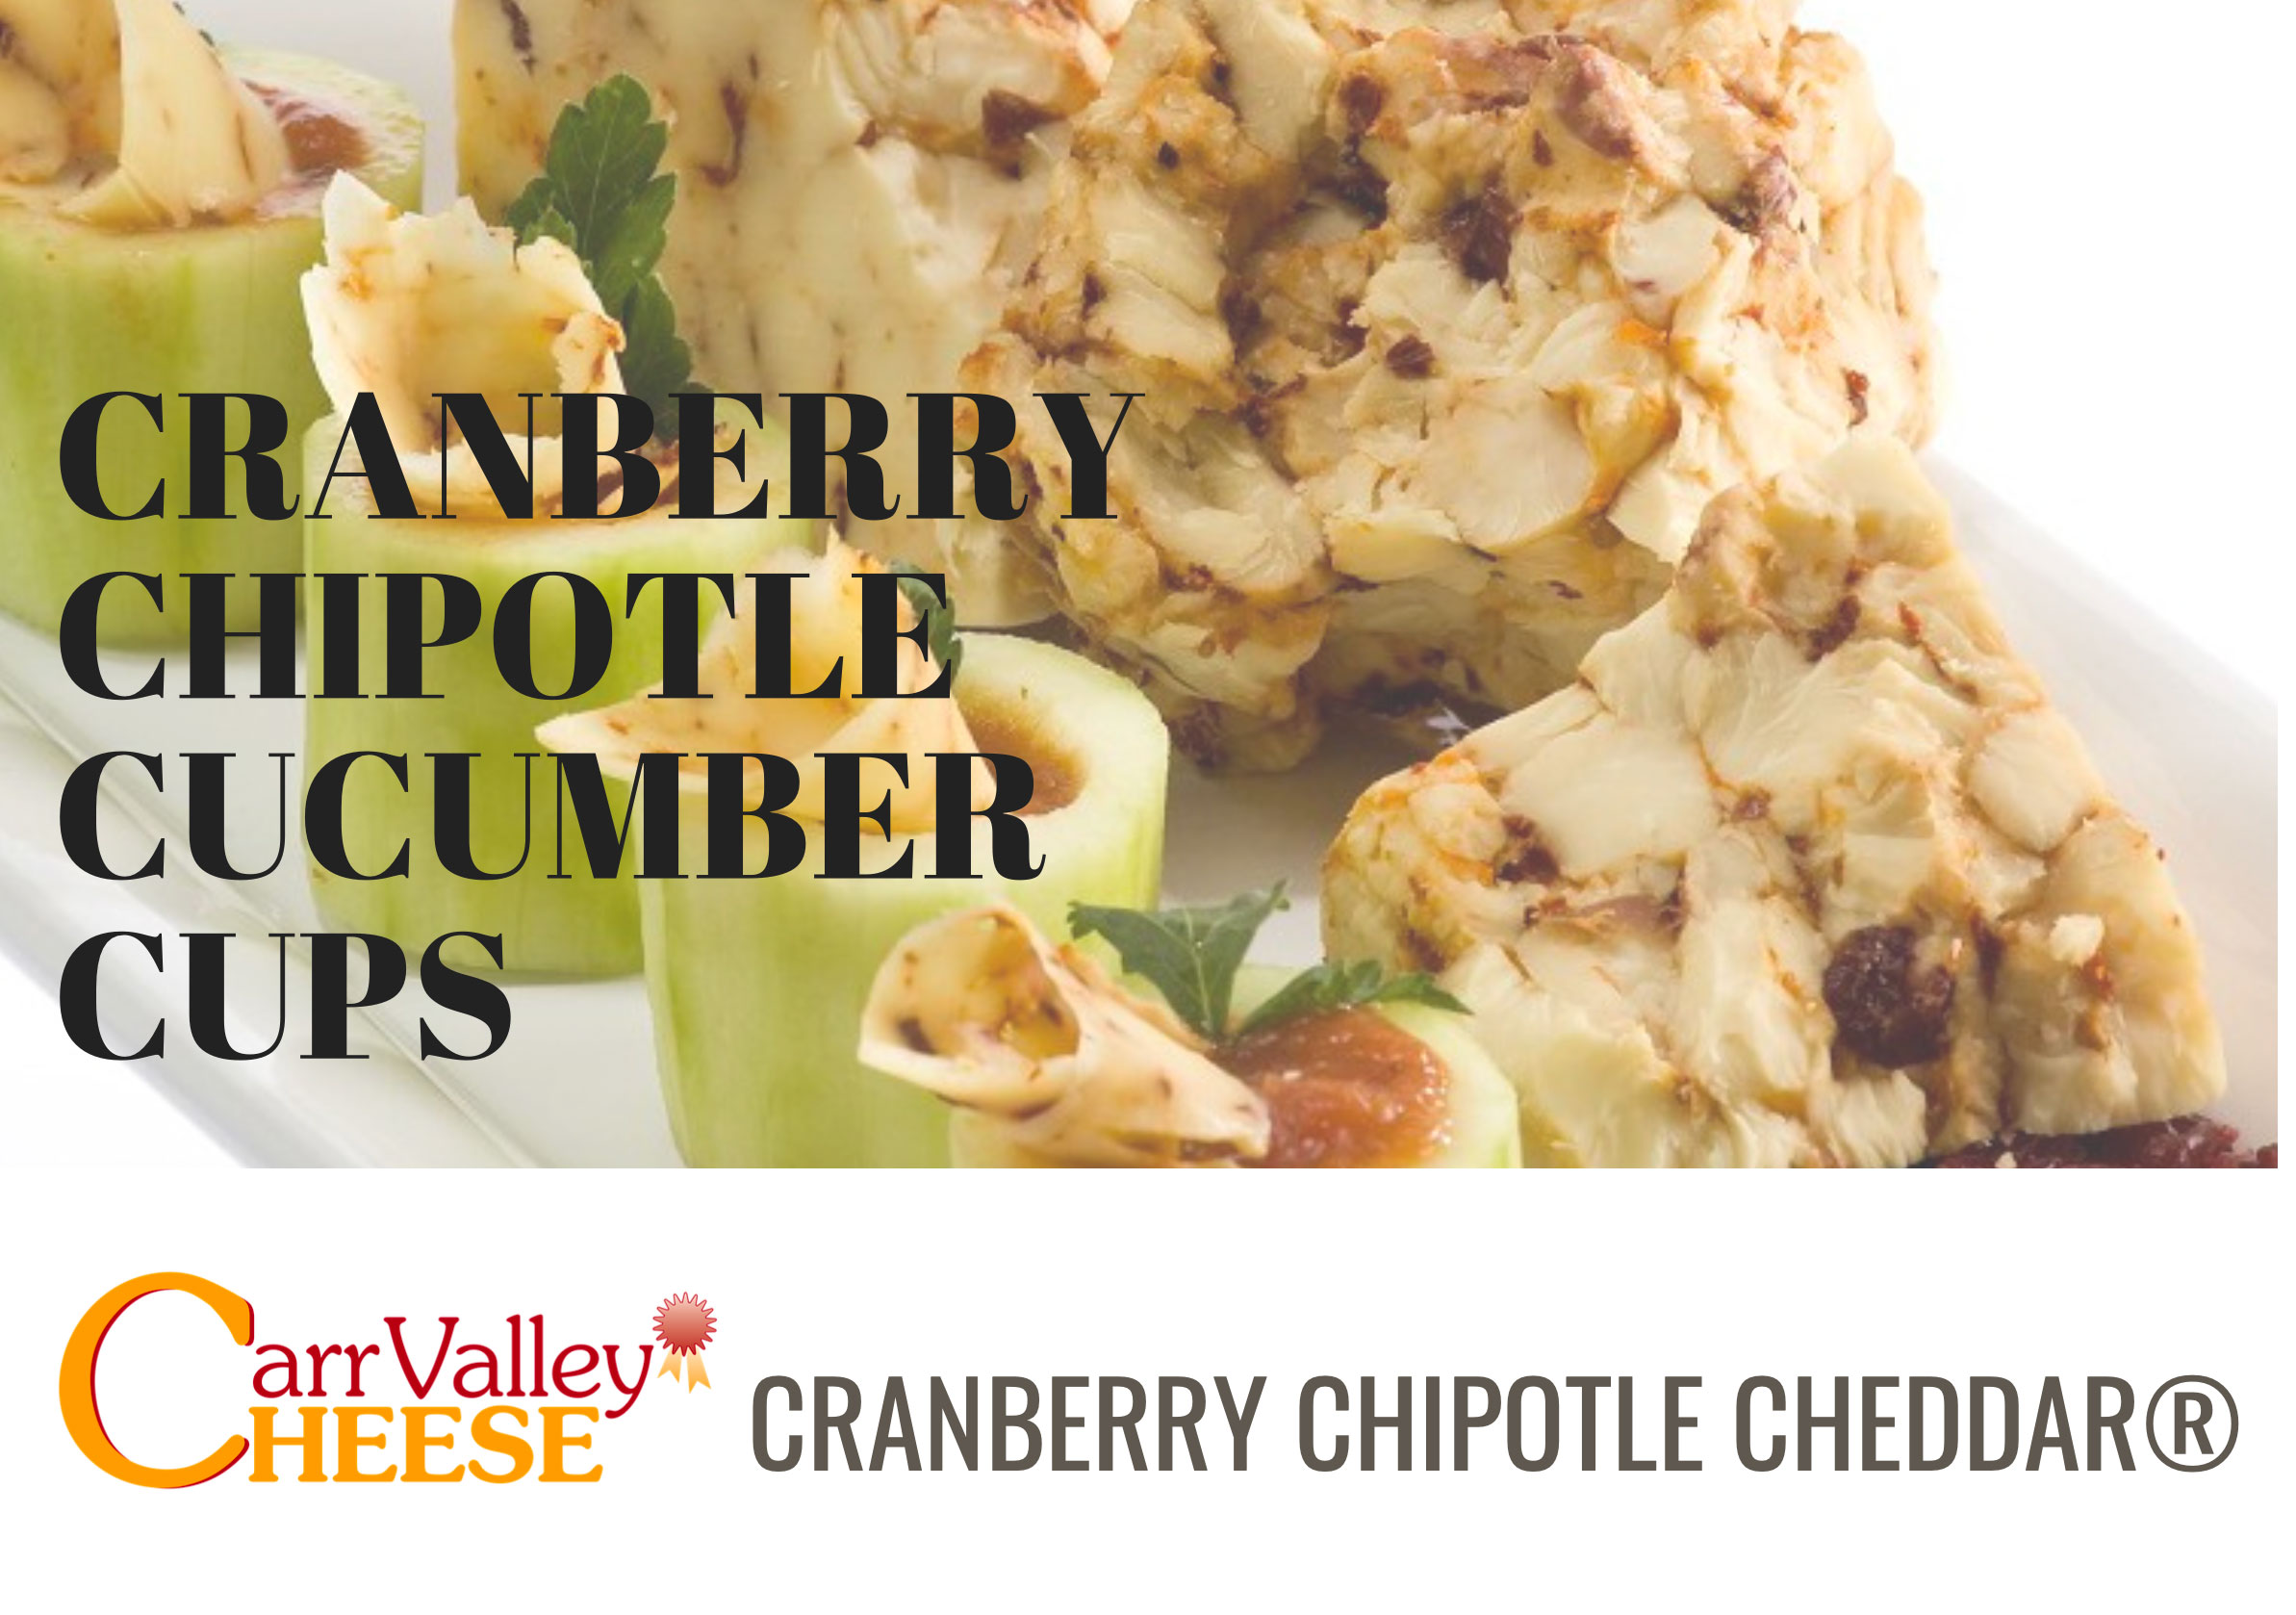 Click this image of the recipe card to download your copy of the Cucumber Cup with Cranberry Chipotle Cheese  Recipe.